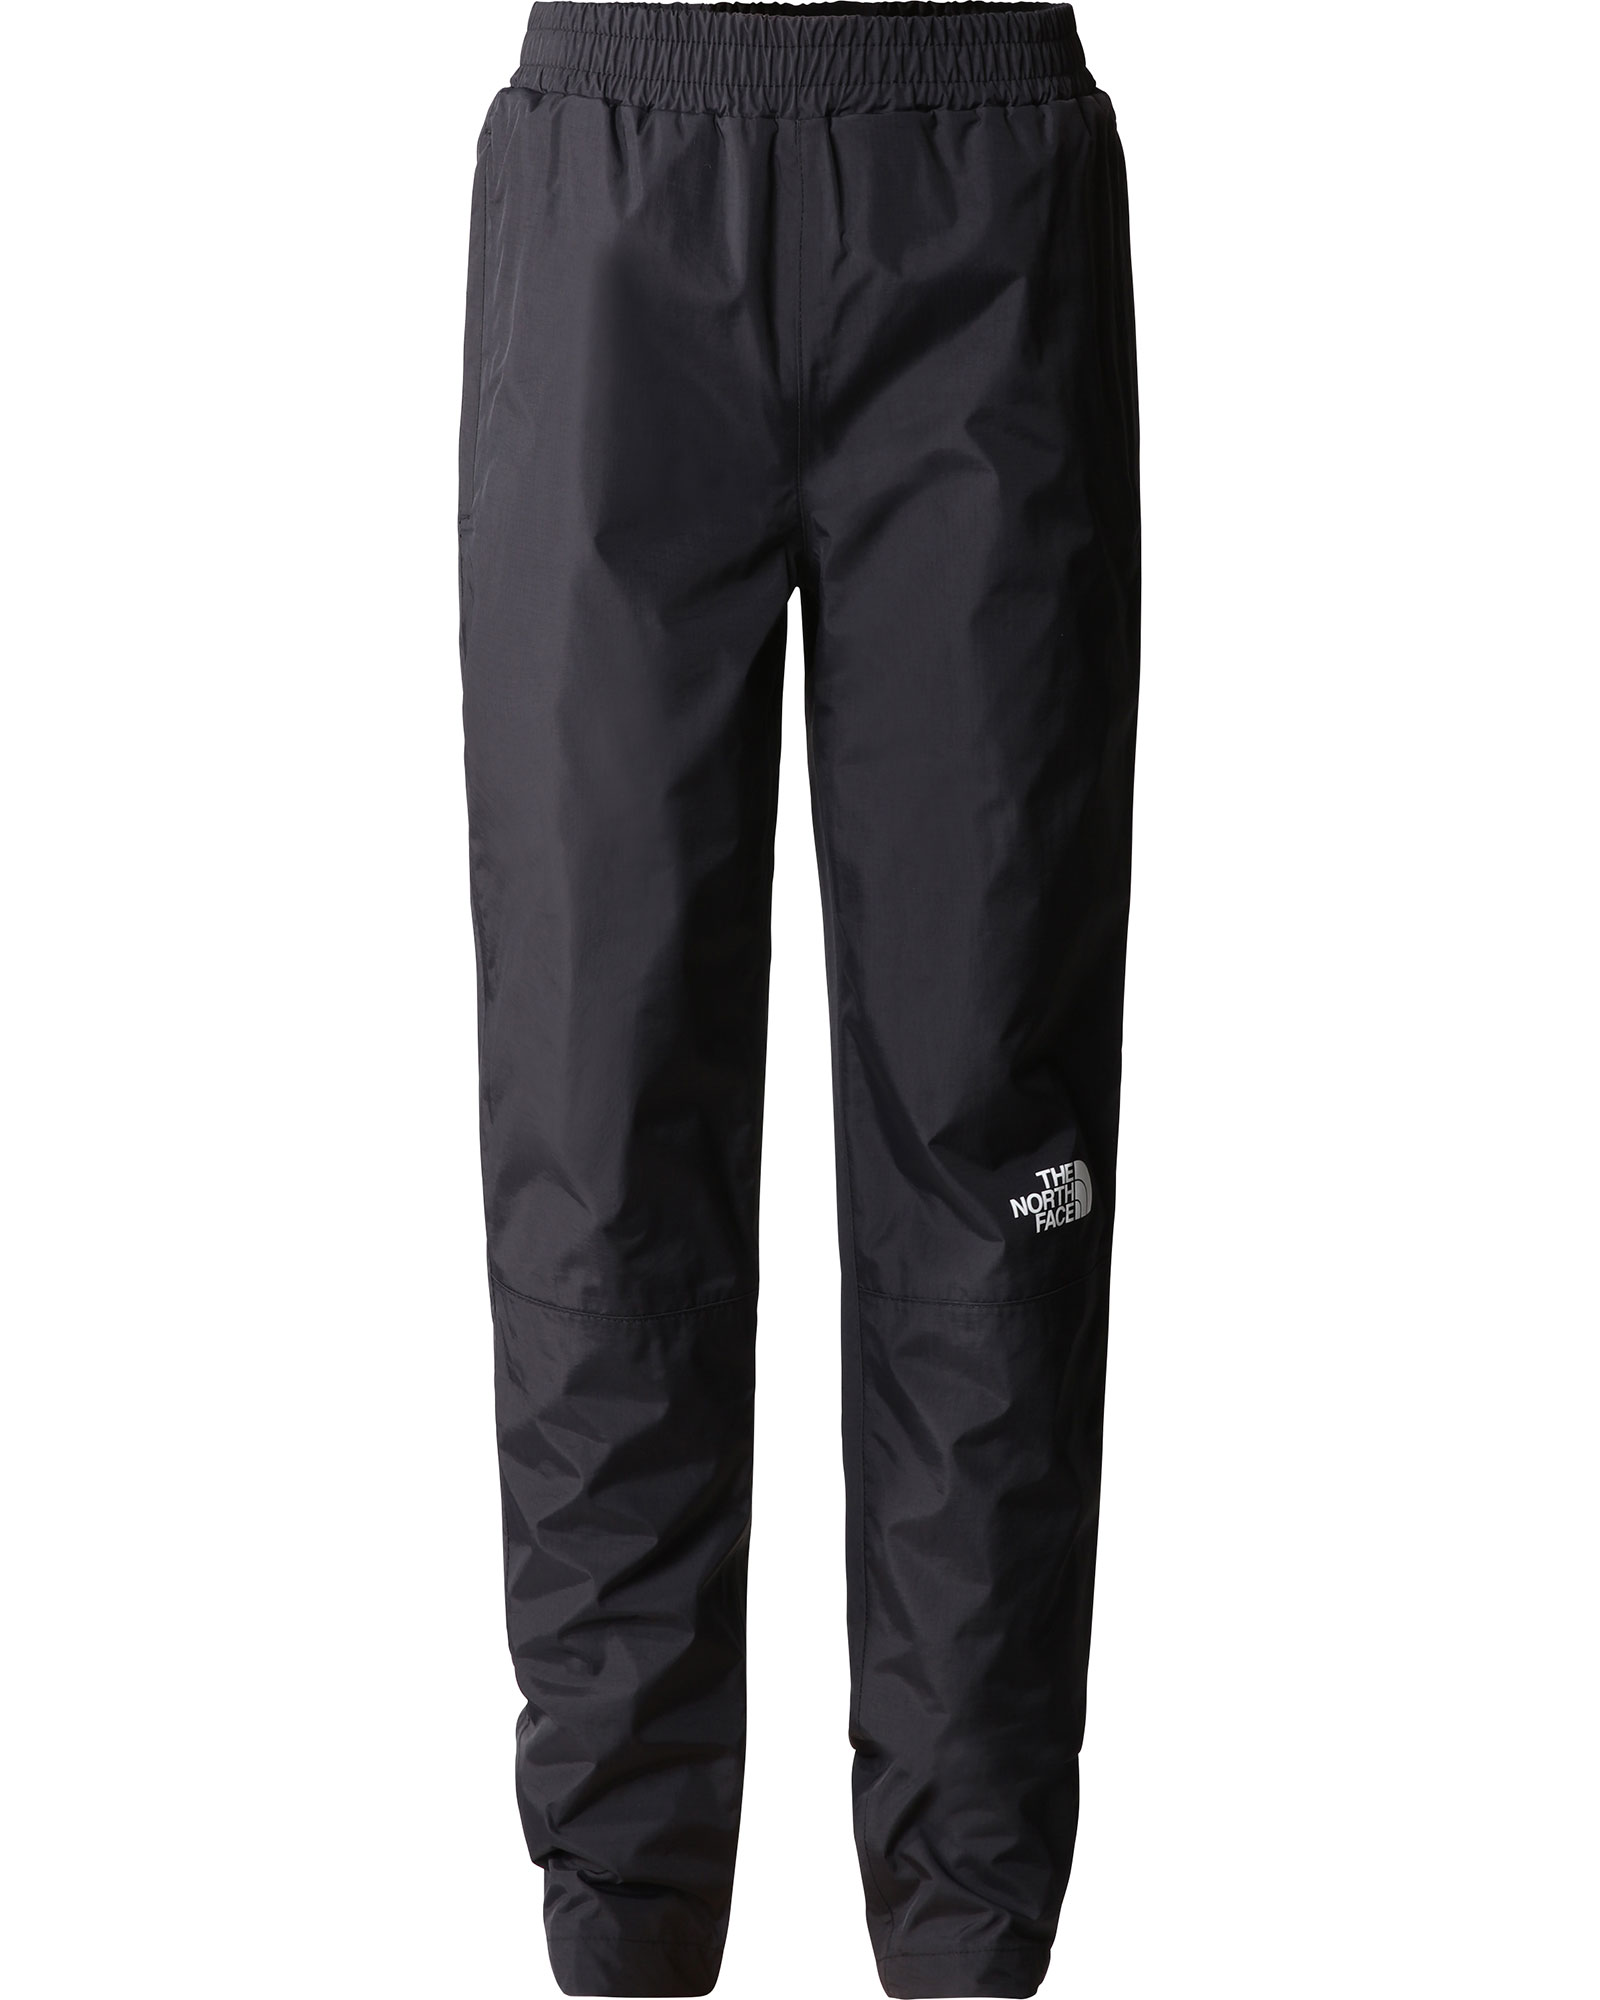 Mac In A Sac Packable Unisex Adults Waterproof Overtrousers/Pant Navy XXXL